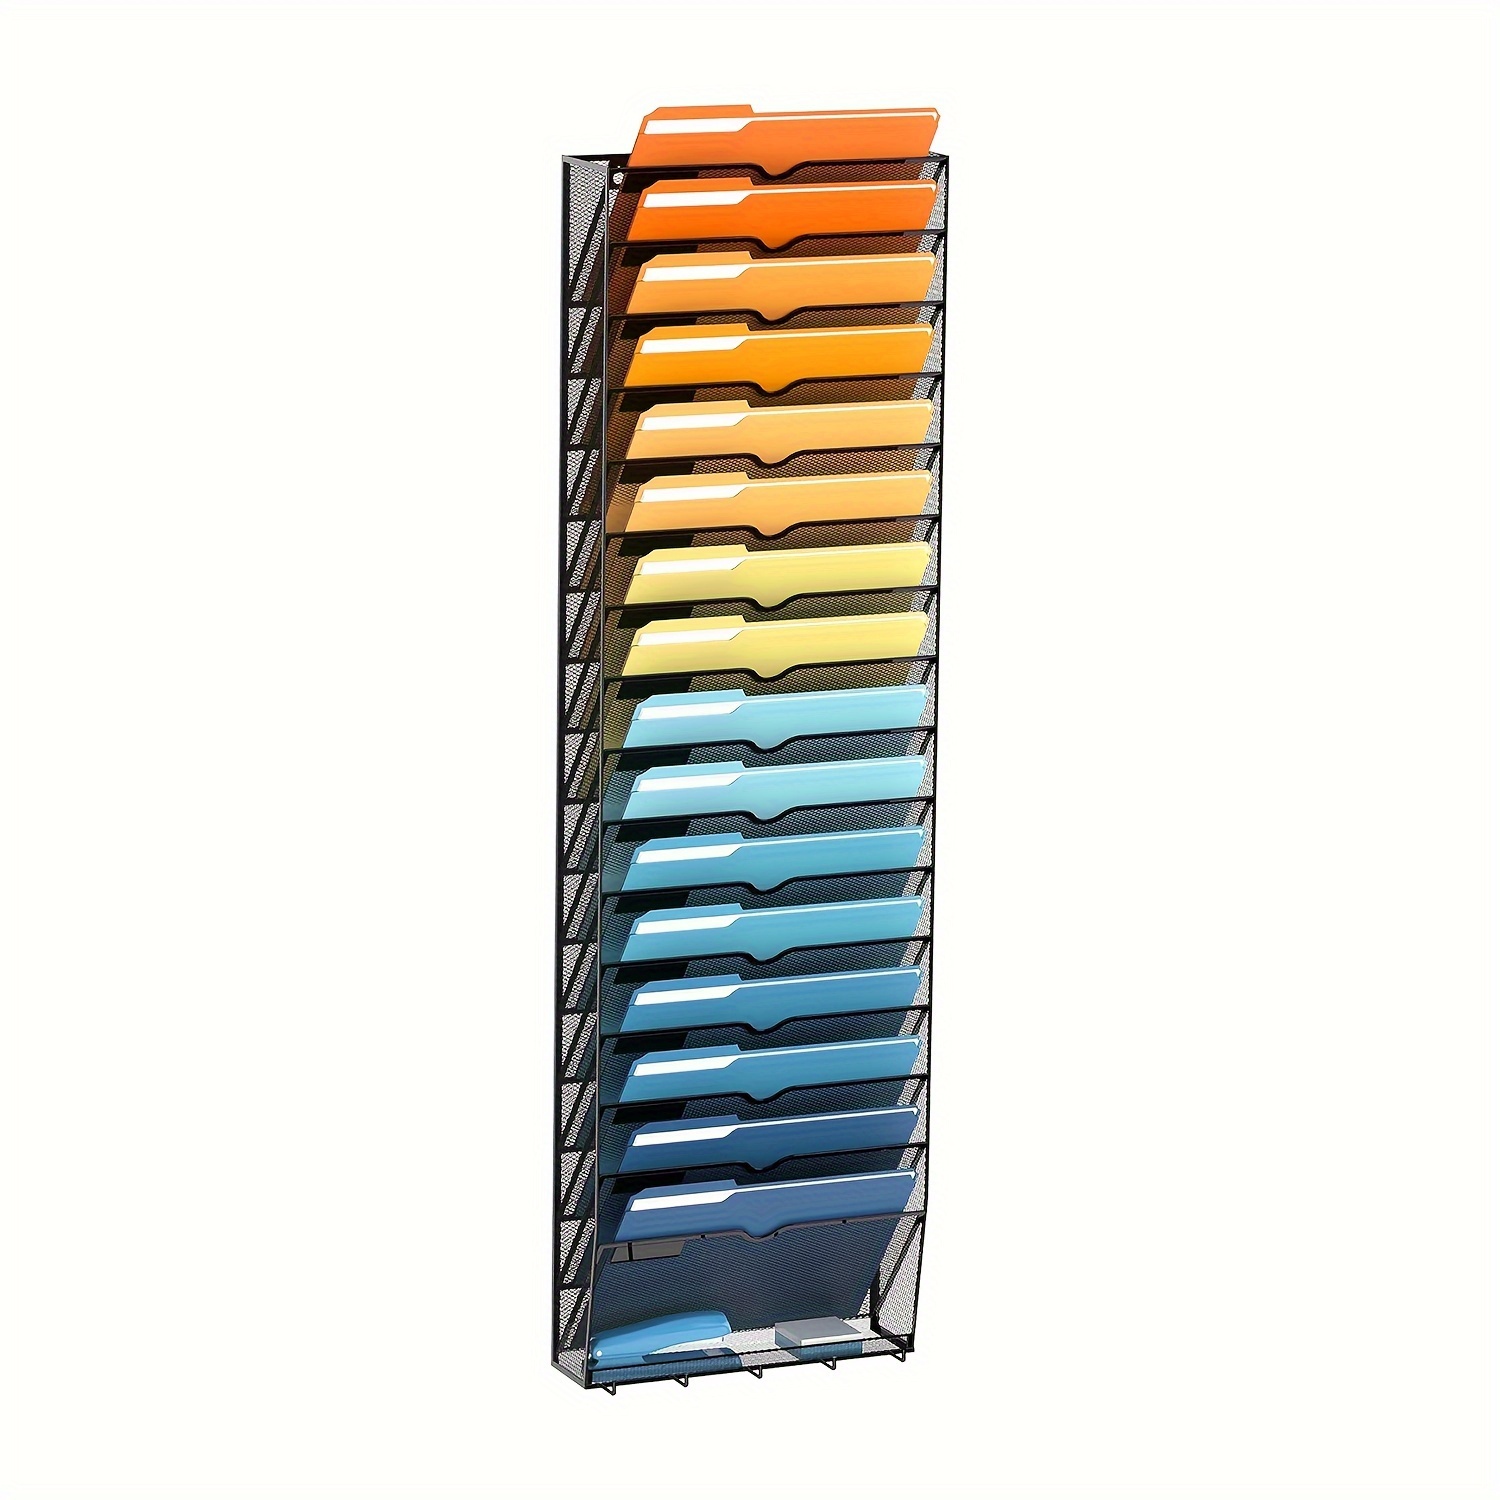 

17-tier Mesh Wall File Holder, Hanging Wall File Organizer, Office Organization For Papers, Mails, Folders, Files Clipboard Magazine Rack